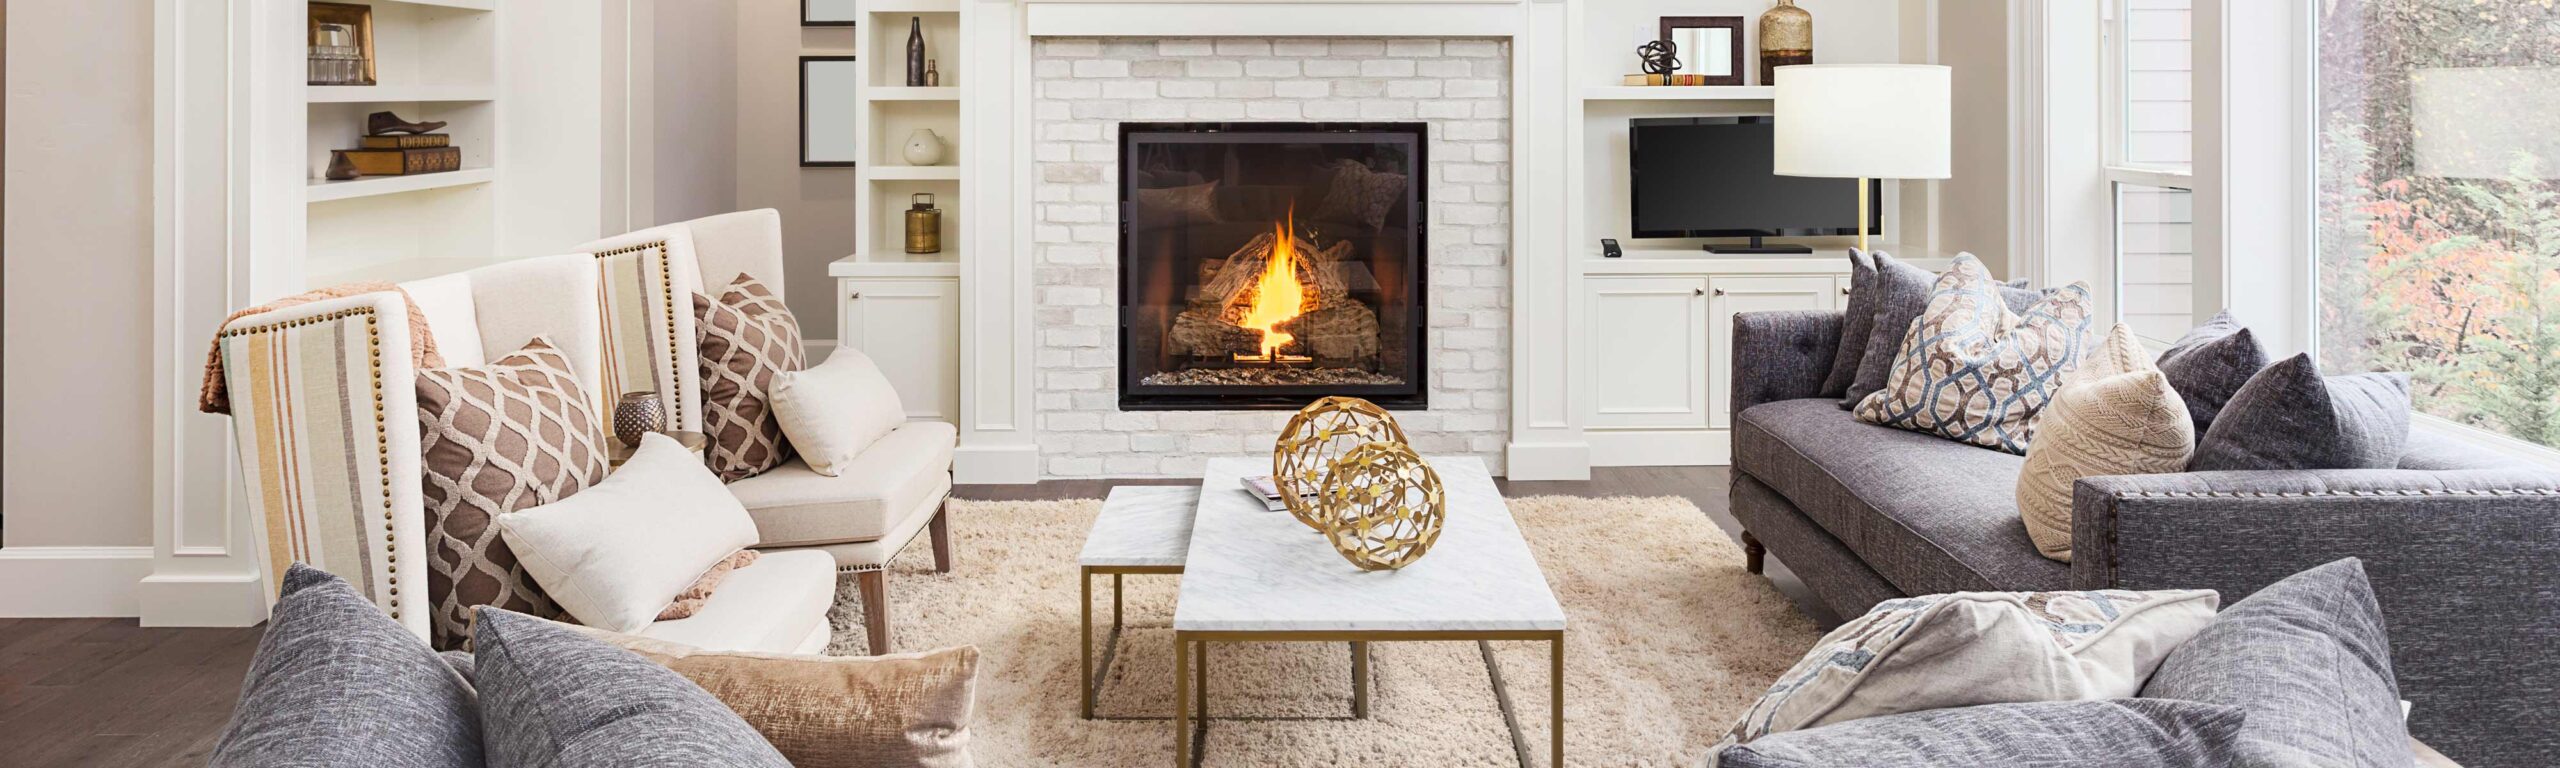 A beautiful neutral living room with crackling fireplace.